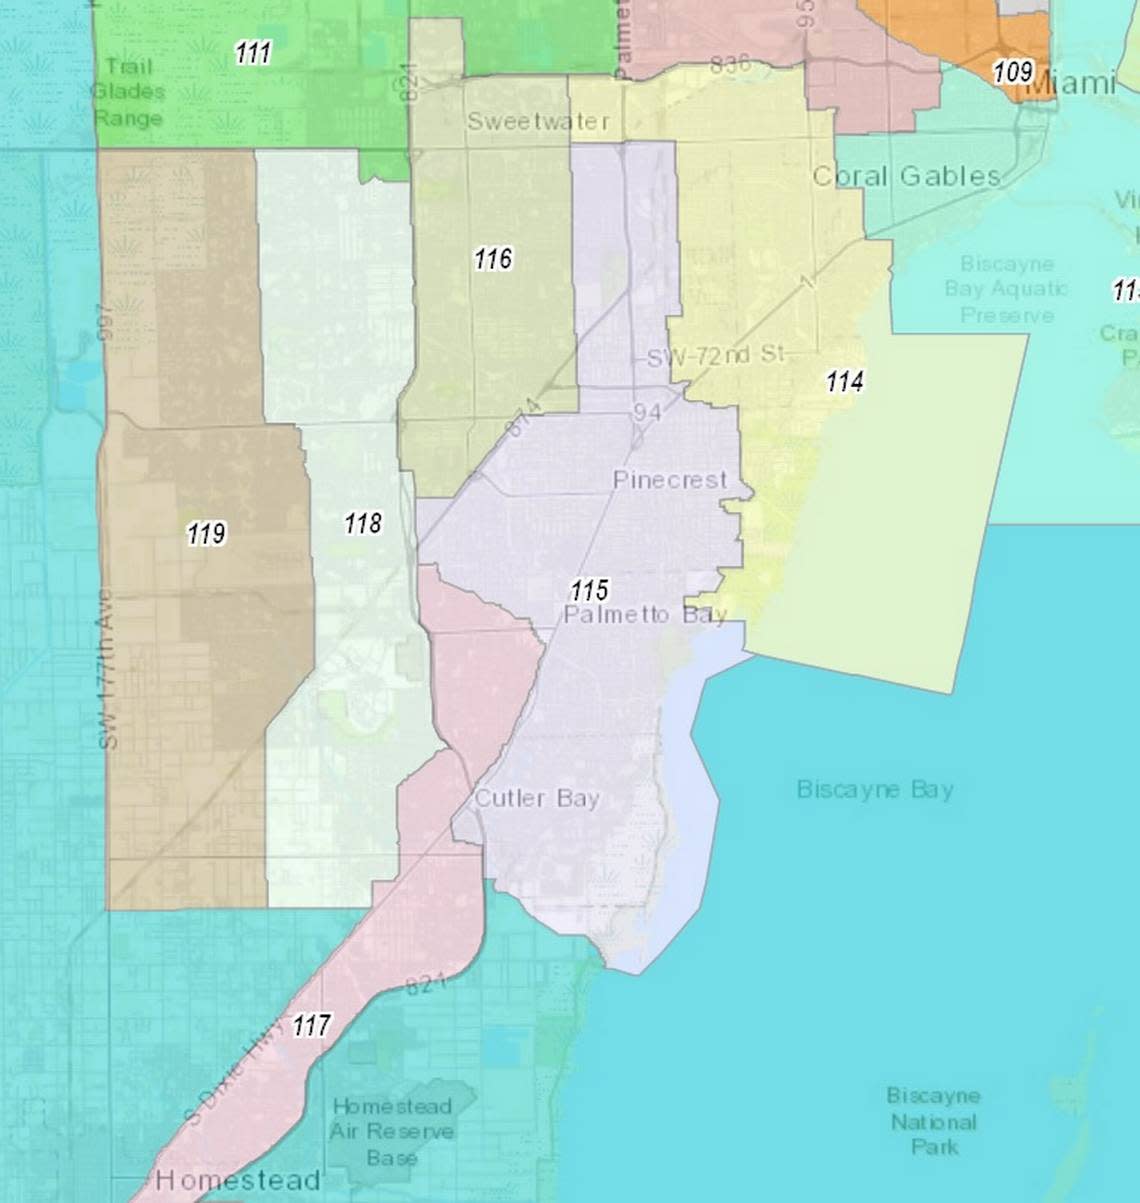 A map of Miami-Dade County’s state House districts, including districts 118 and 119, representing parts of west and Southwest Dade.